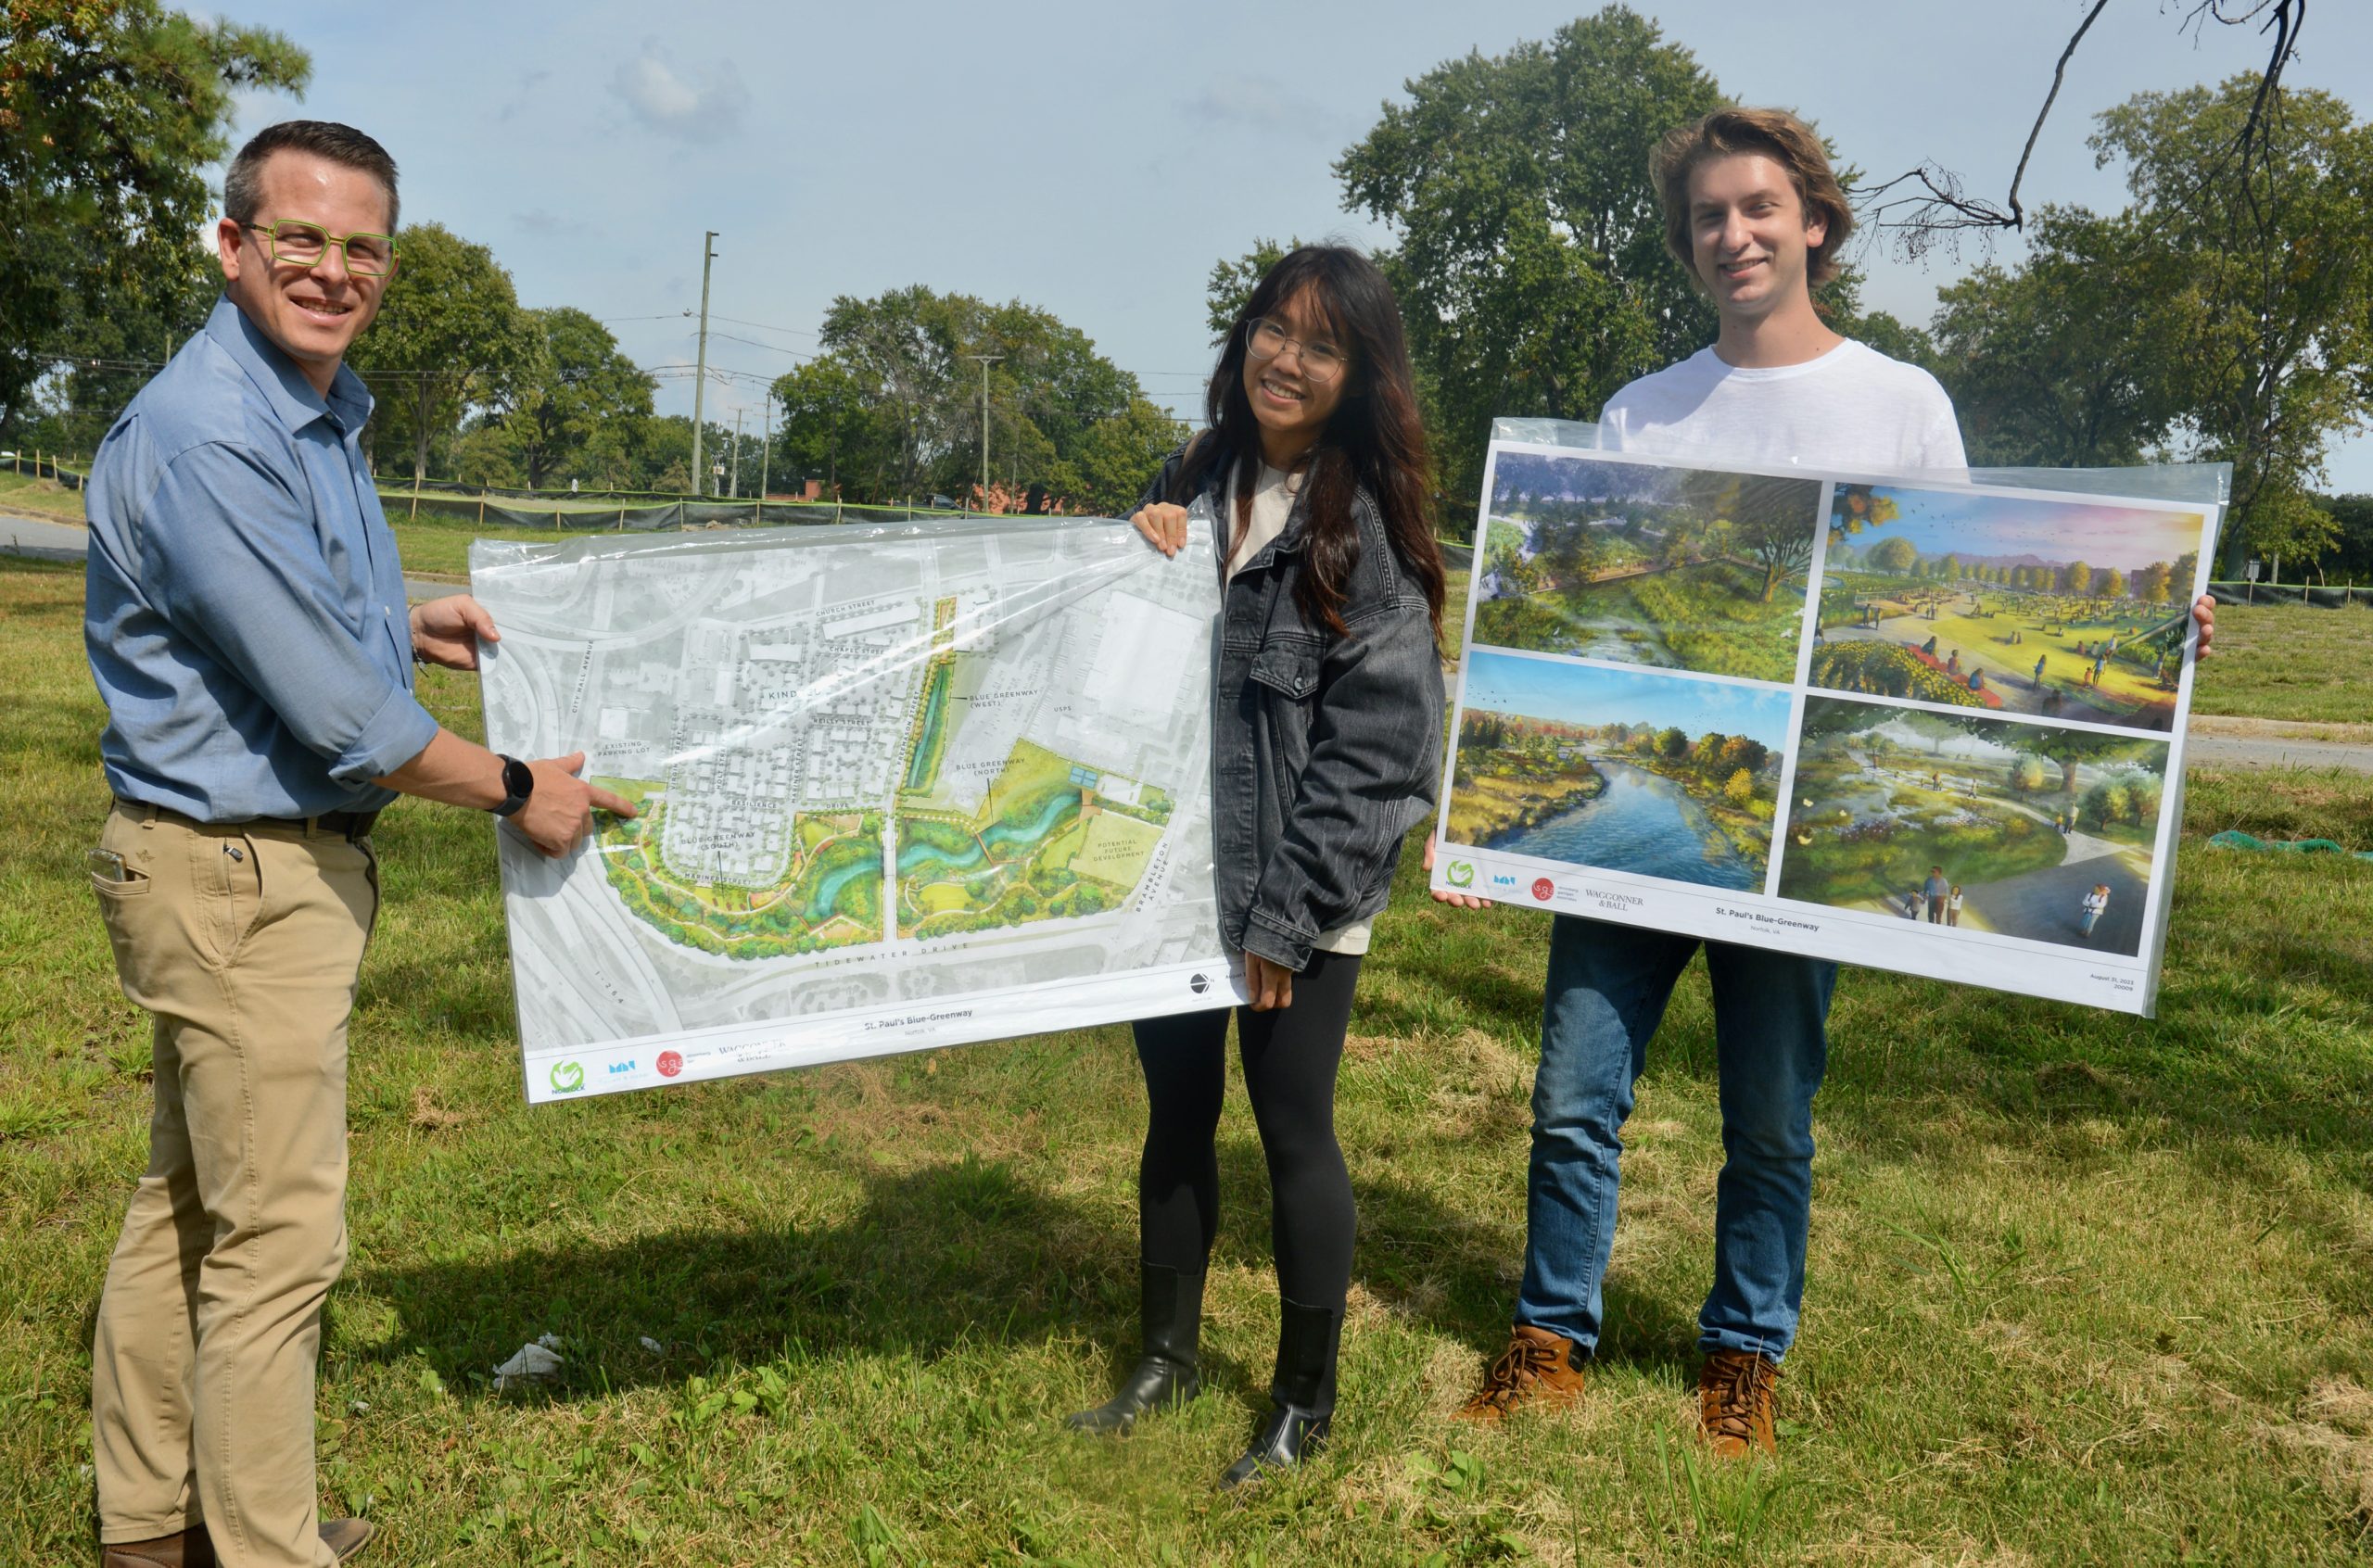 Three people stand in a field holding posterboard that depicts a landscape improvement project.